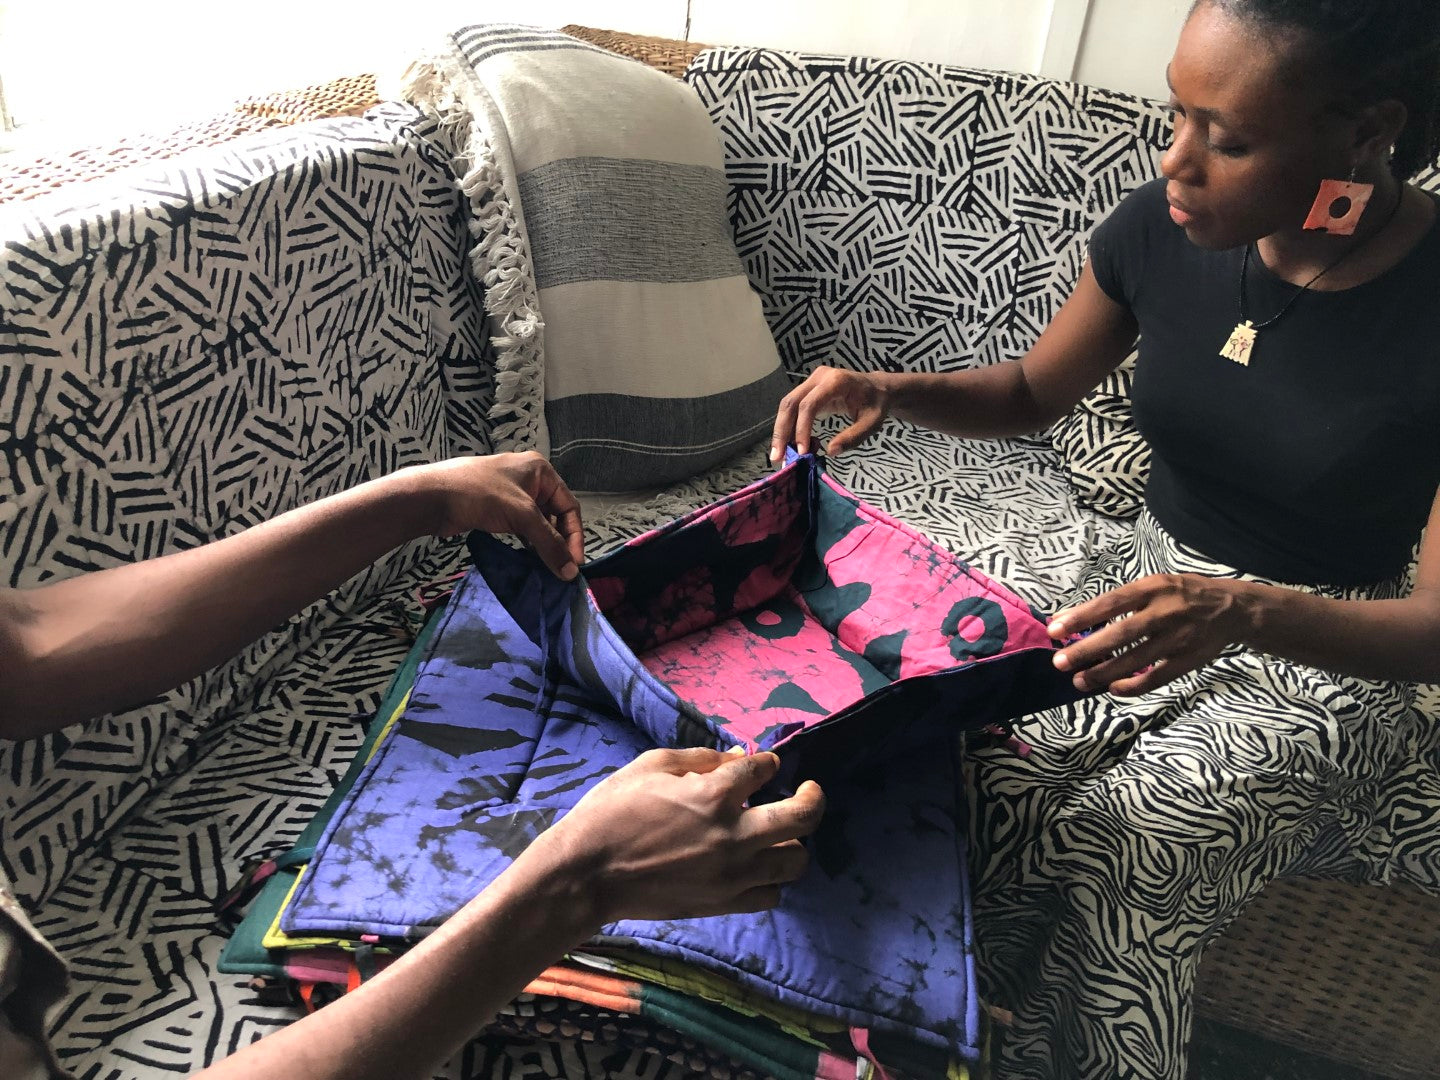 Two people reviewing vibrant batik dyed fabric on a patterned couch.